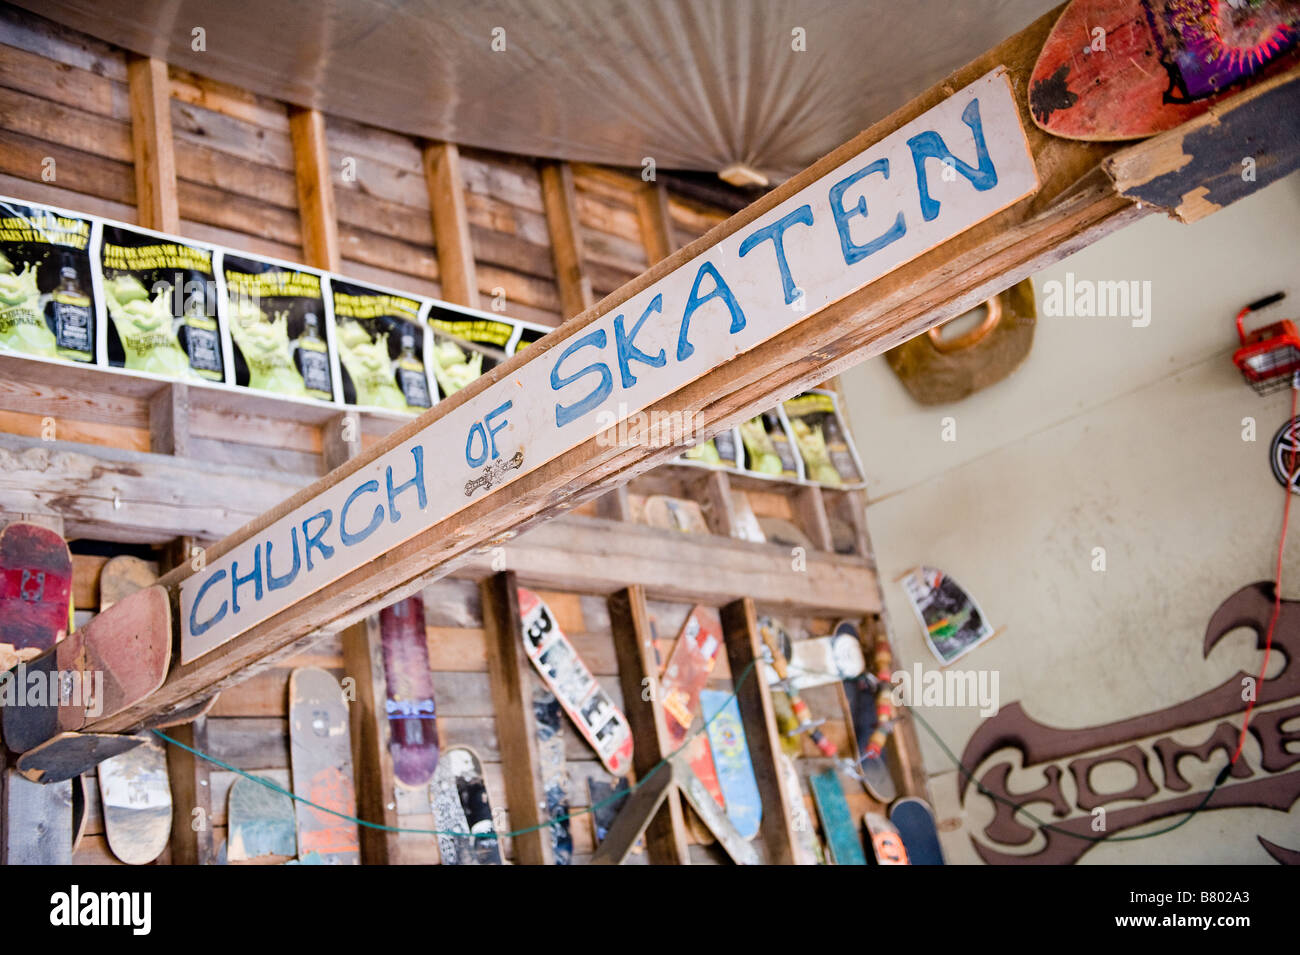 Shop Boarding High Resolution Stock Photography and Images - Alamy